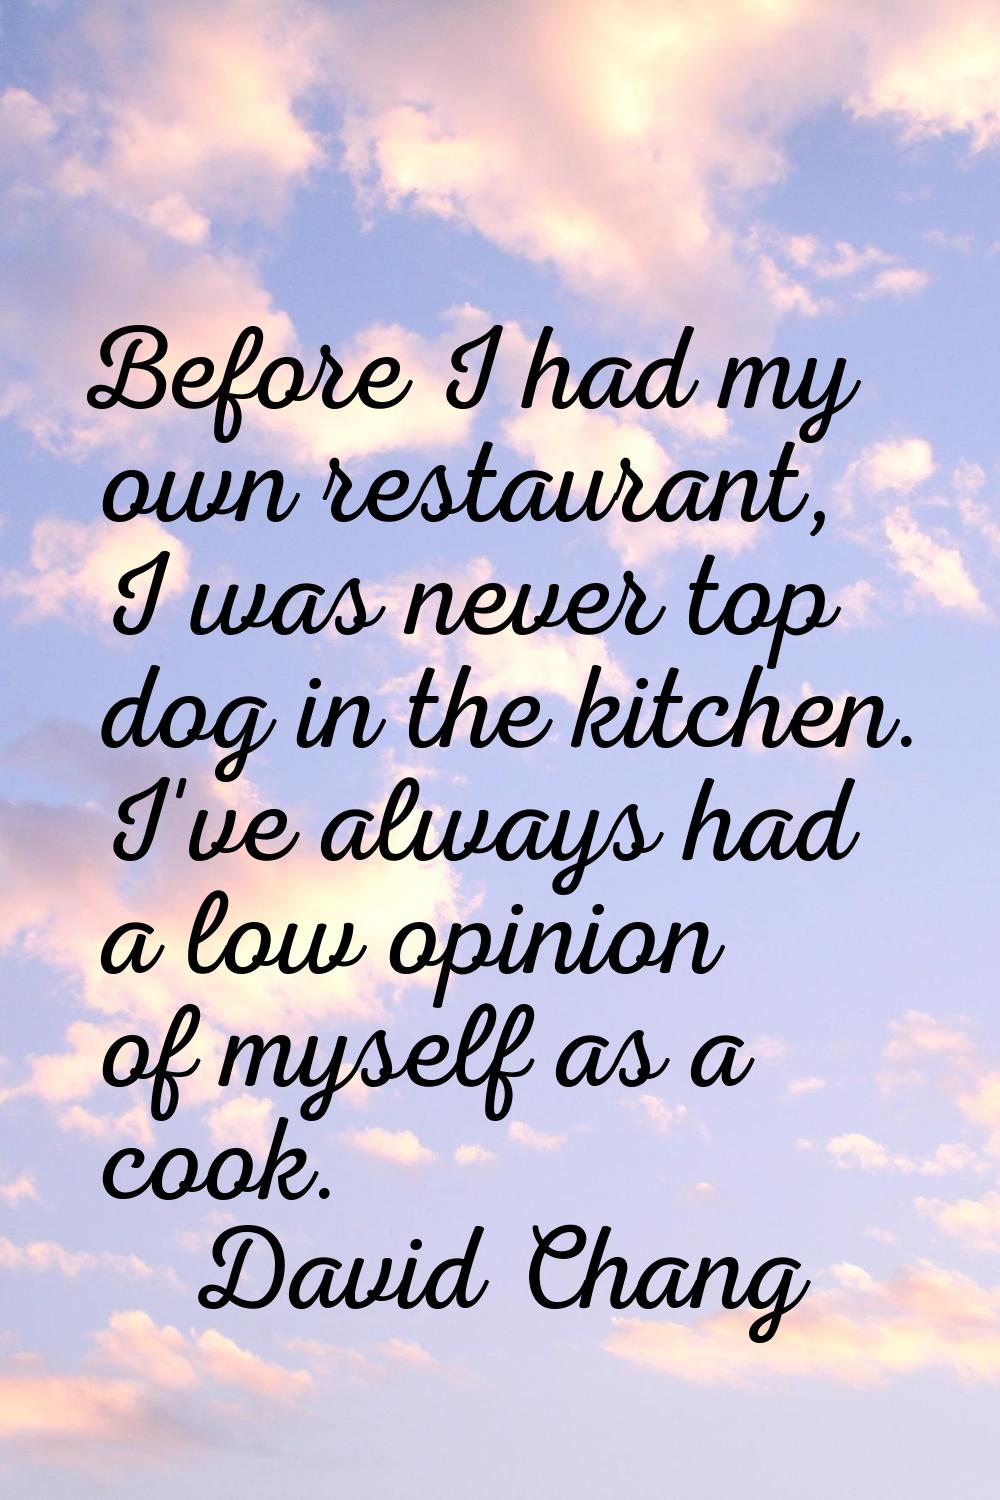 Before I had my own restaurant, I was never top dog in the kitchen. I've always had a low opinion o